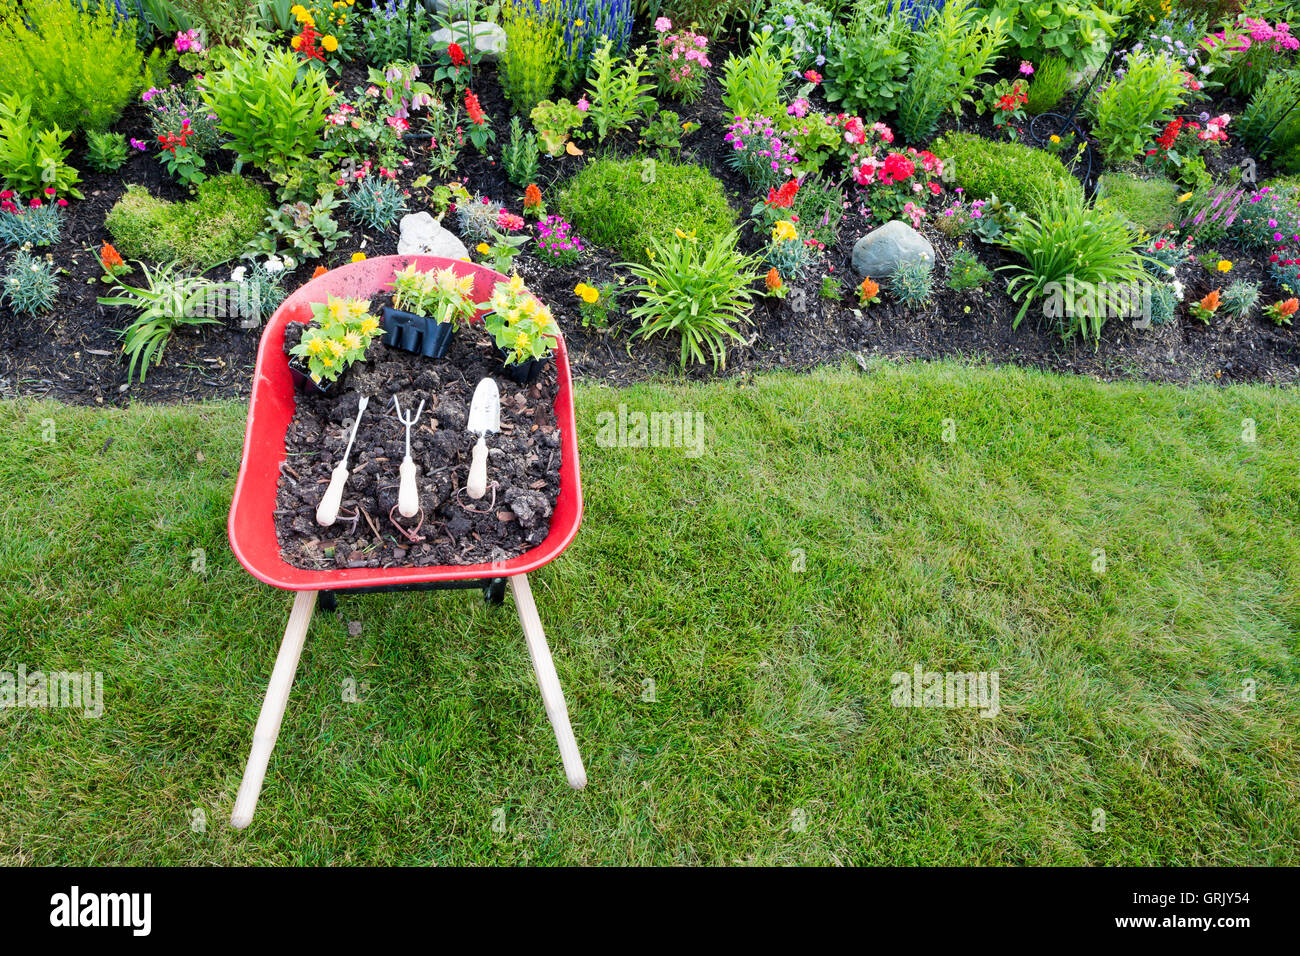 High angle view of a wheelbarrow filled with rich potting soil or manure and seedlings for planting yellow celosia in an ornamen Stock Photo